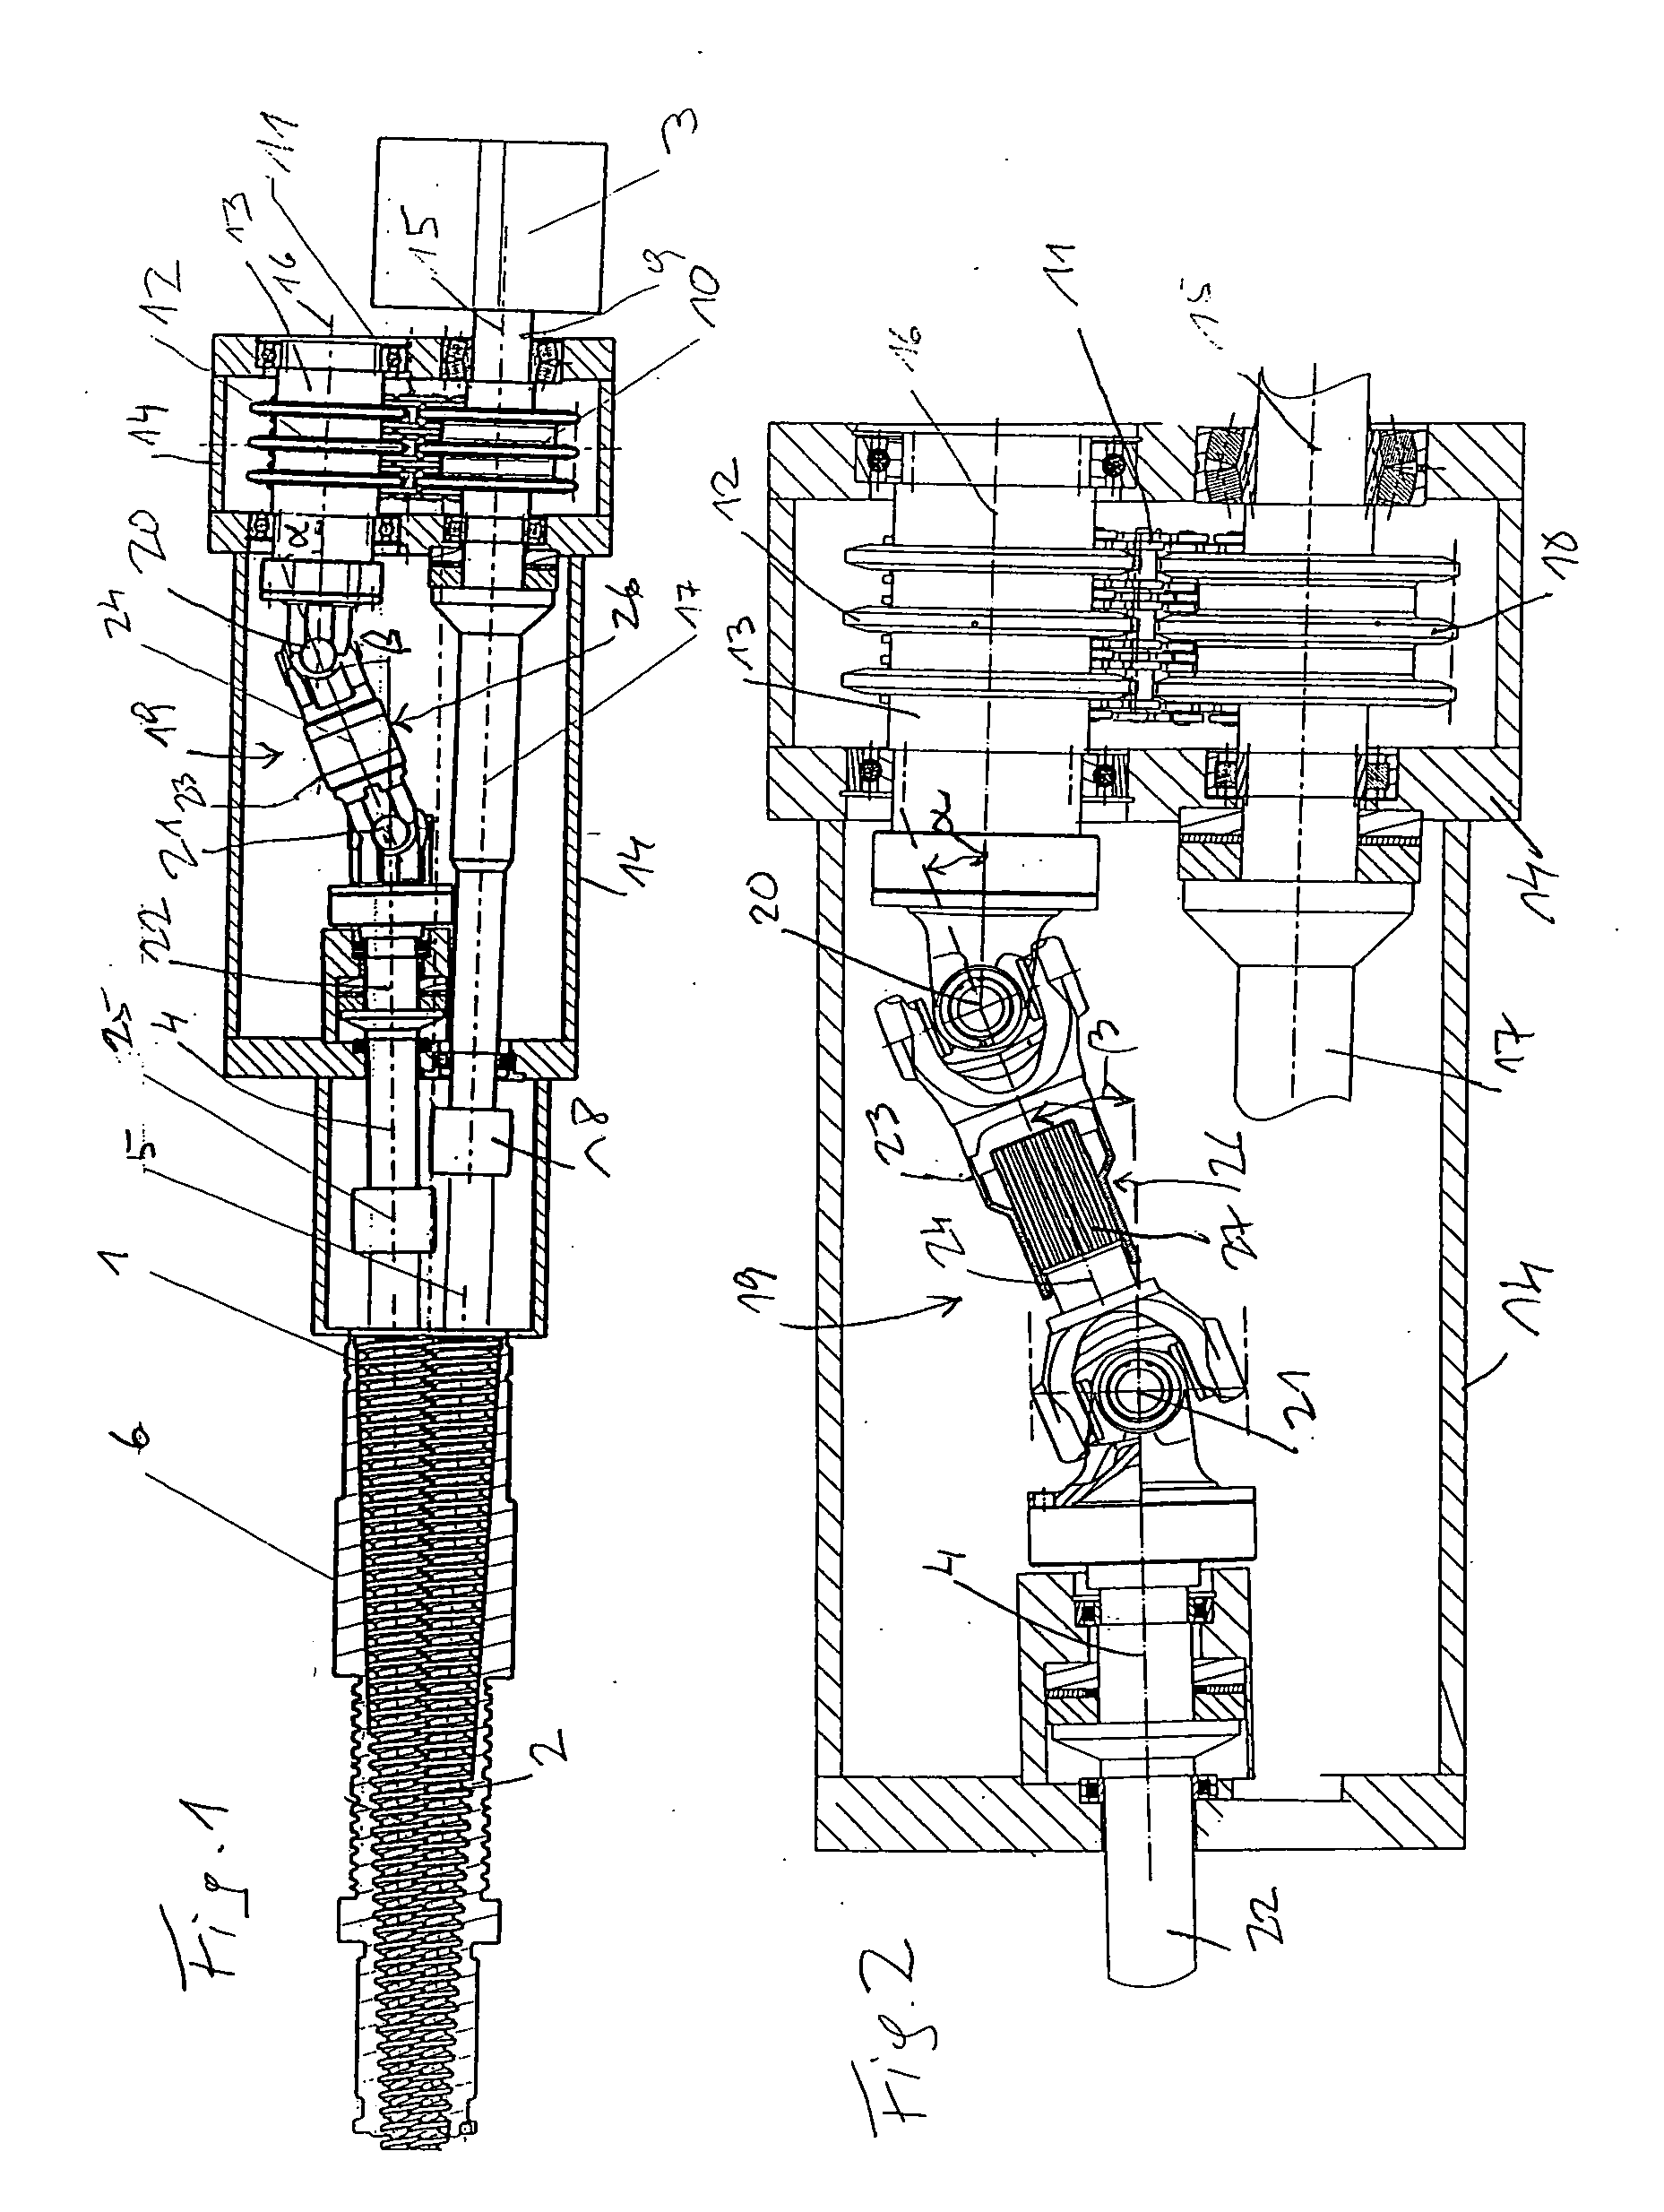 Device for Processing Material by Mixing and/or Plasticization or Agglomeration